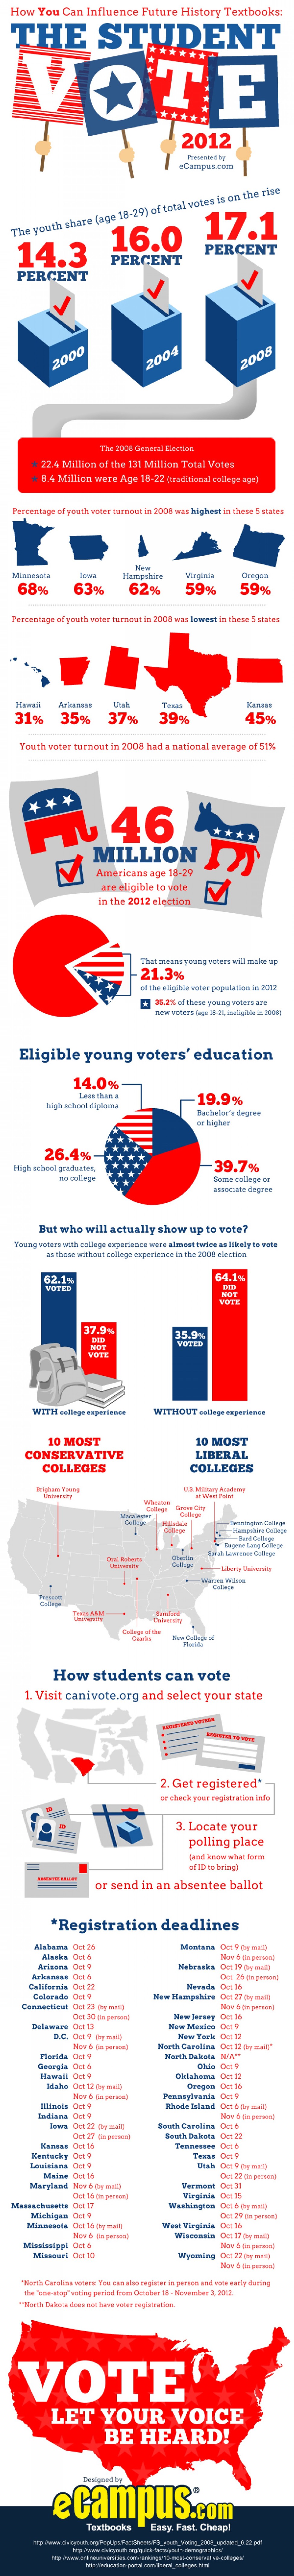 13. Students and Voting